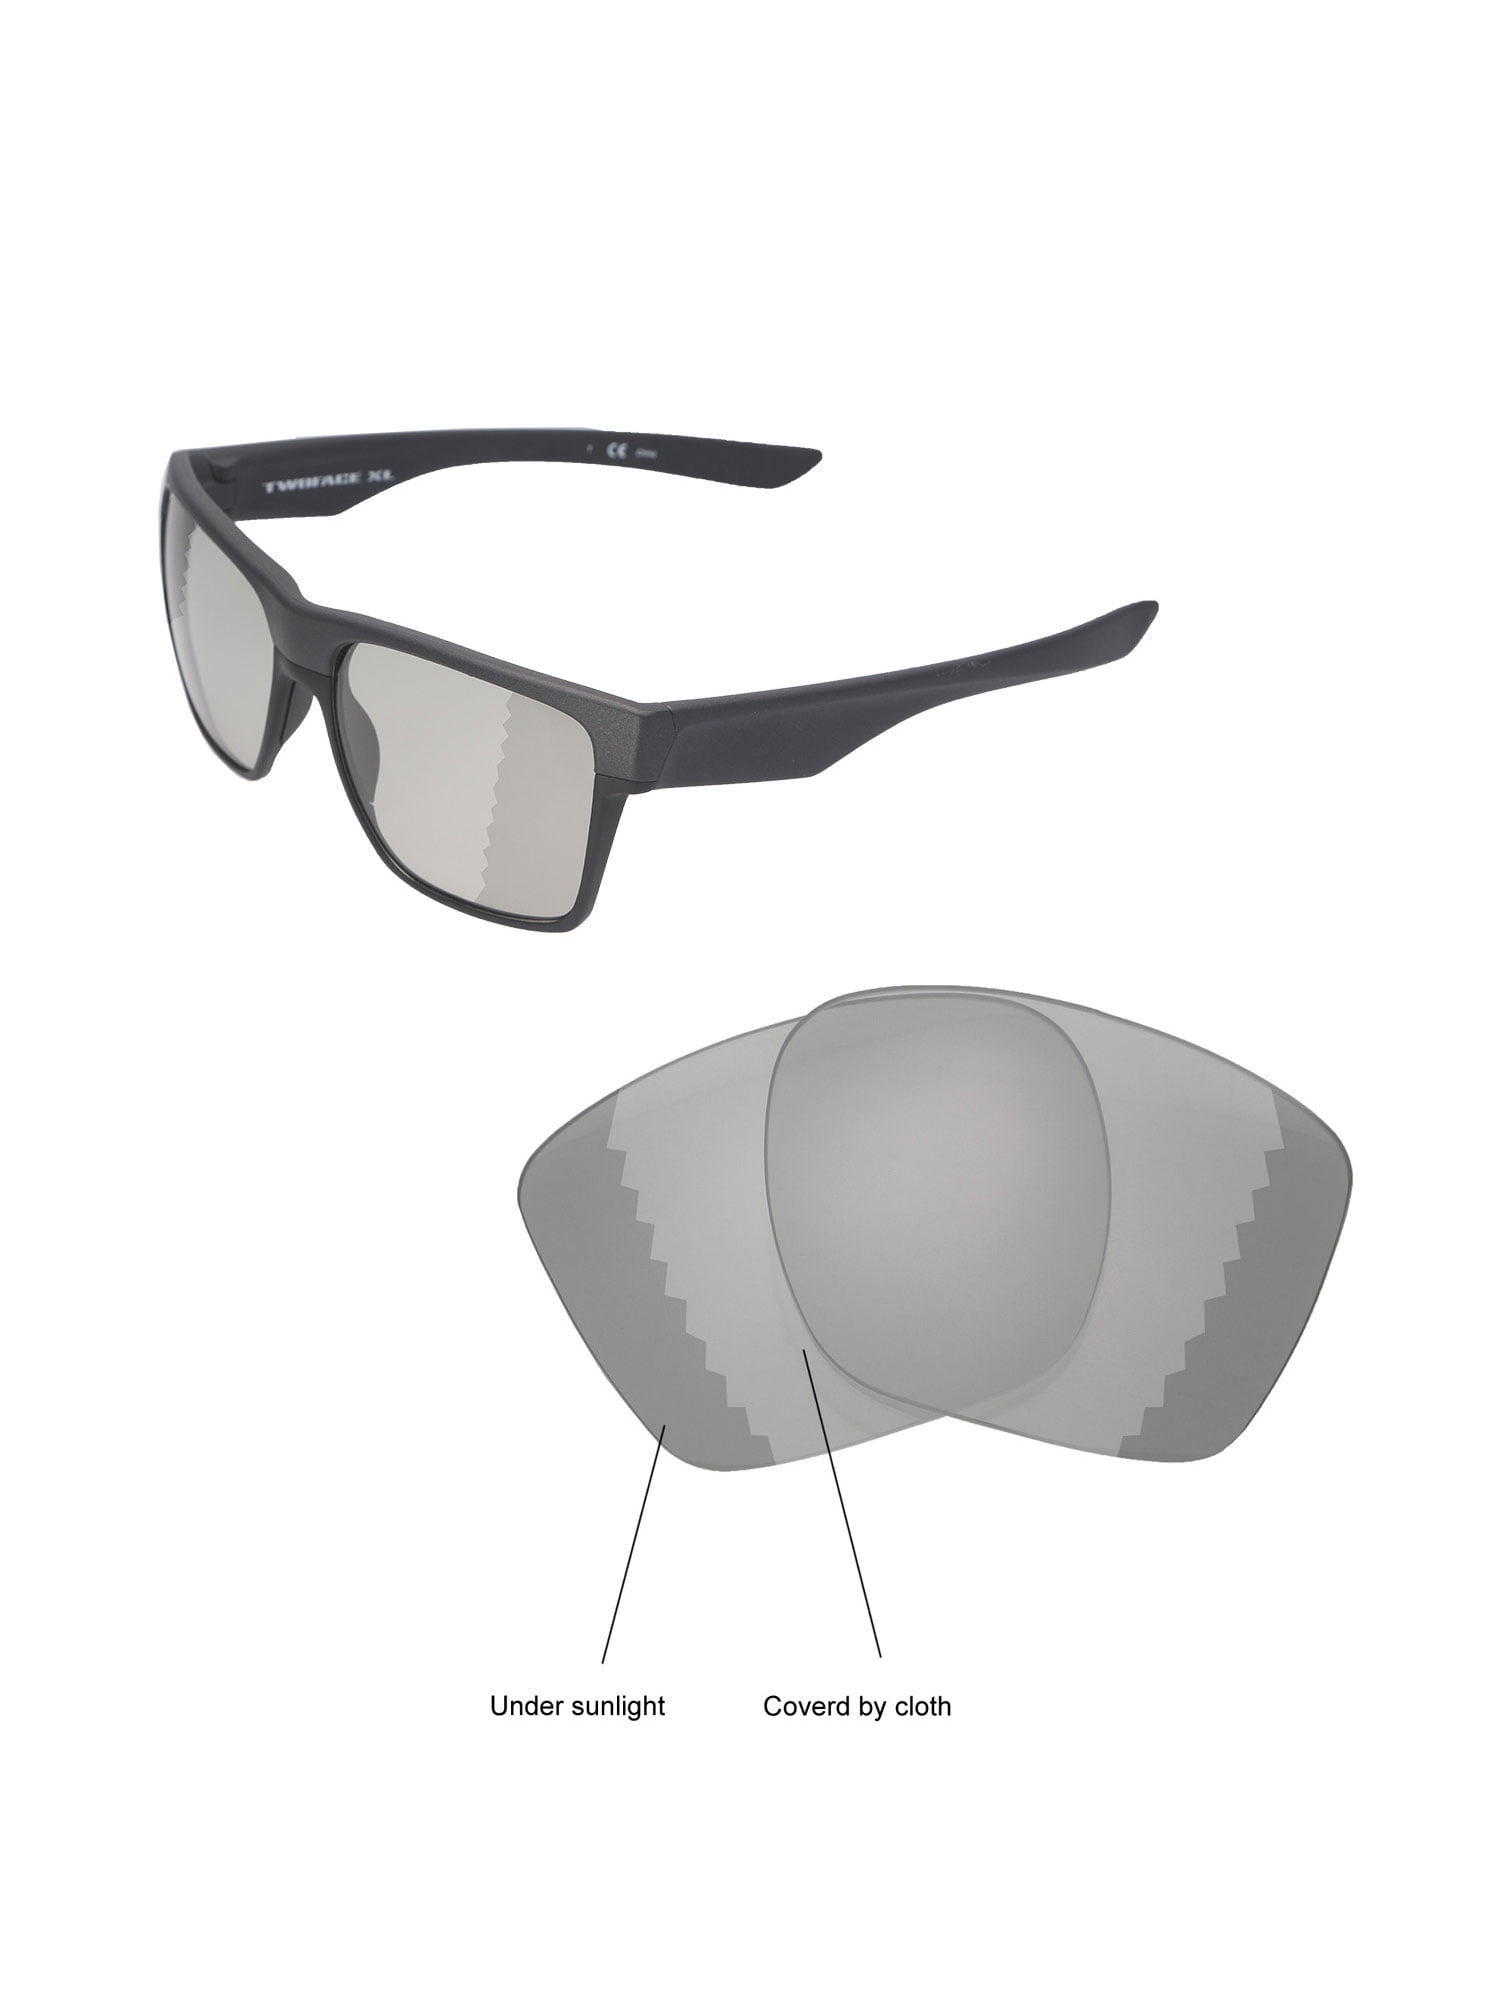 replacement lenses for oakley twoface sunglasses